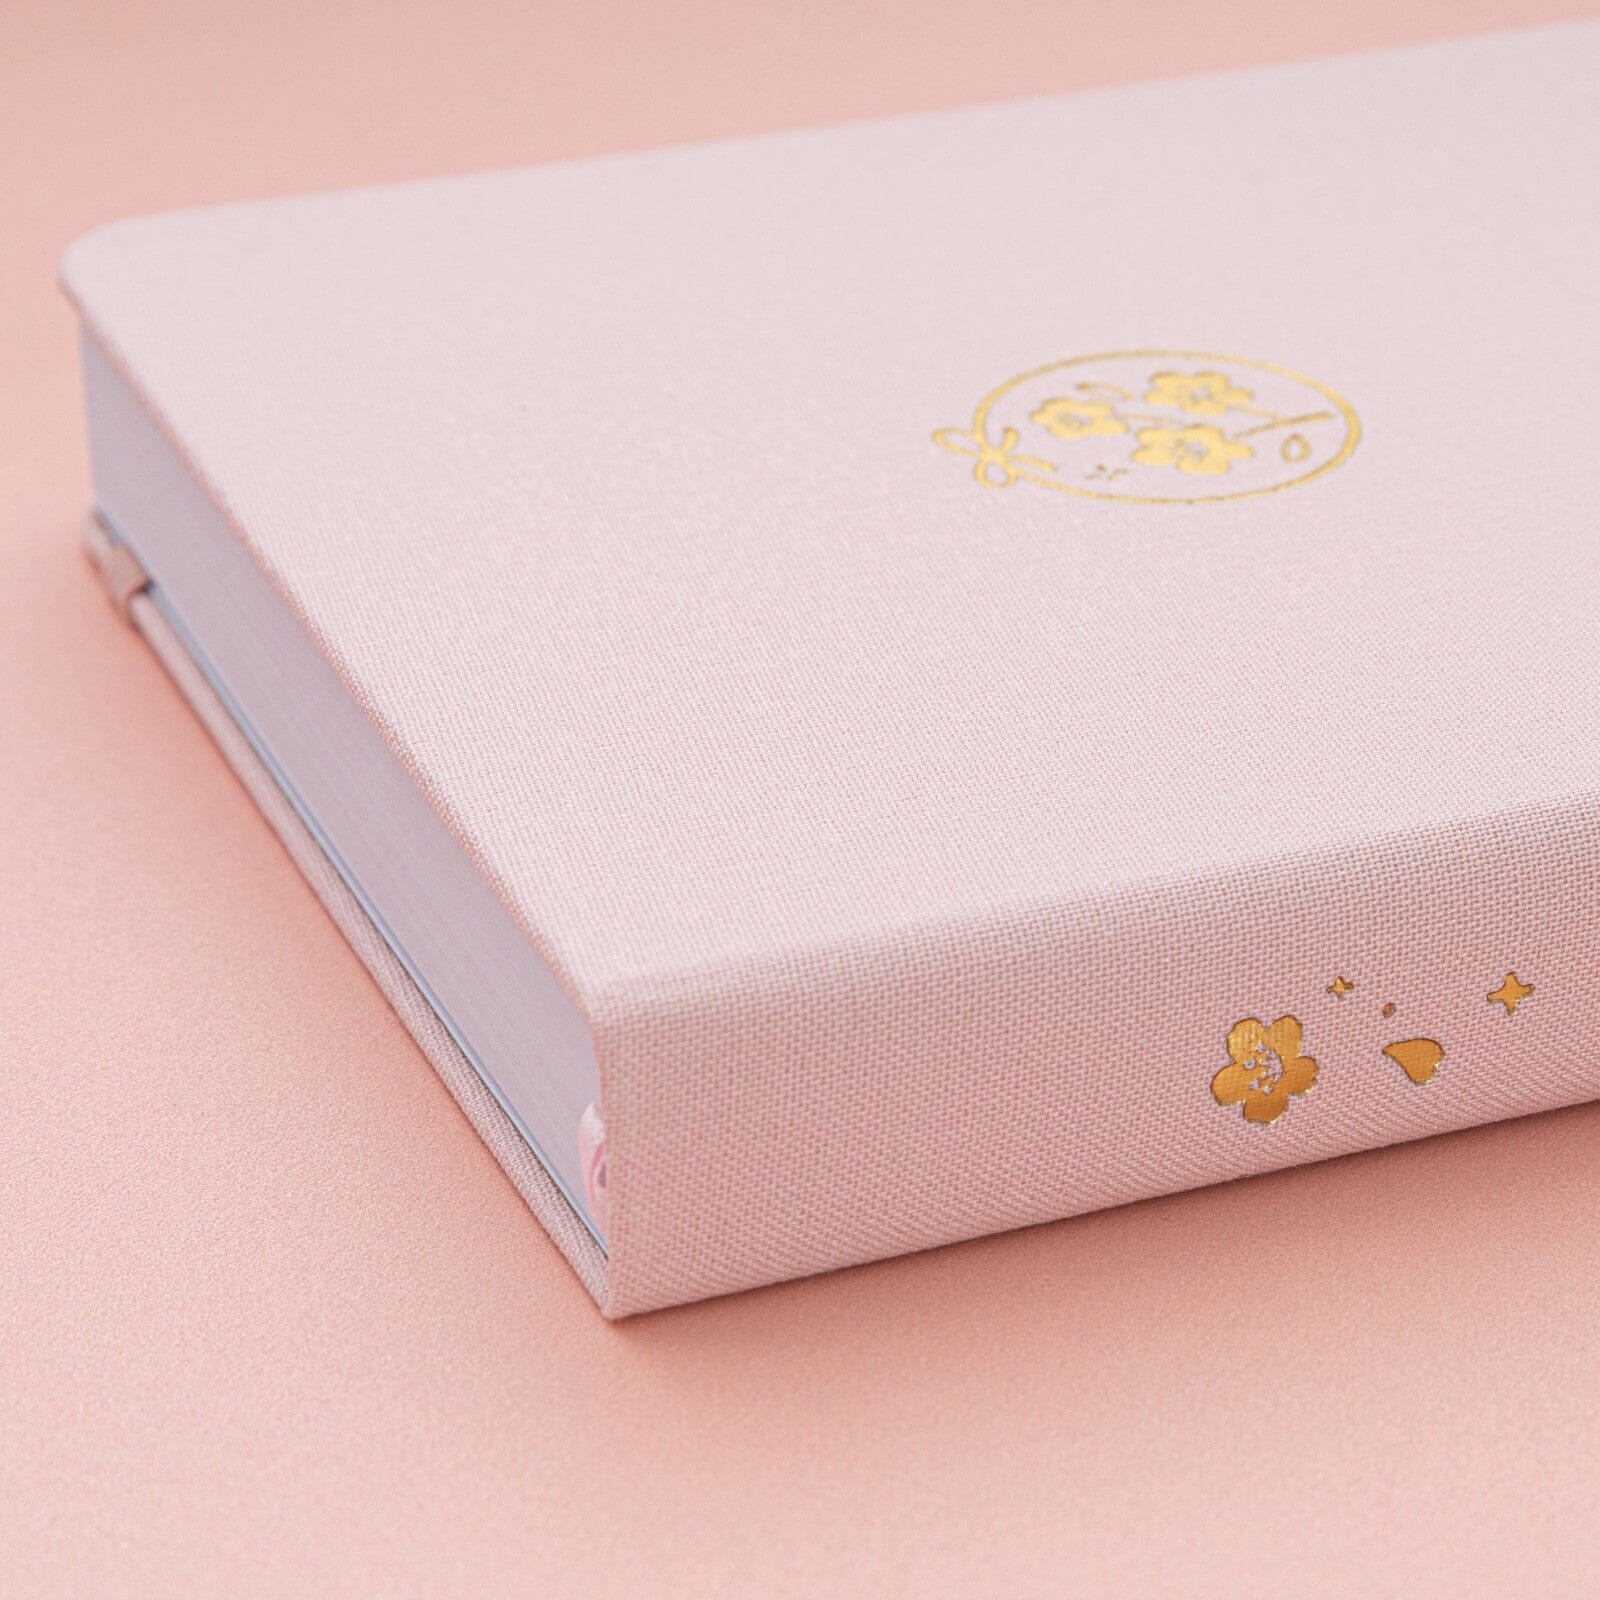 Tsuki Sakura Breeze limited edition bullet journal by Notebook Therapy spine gold foil details